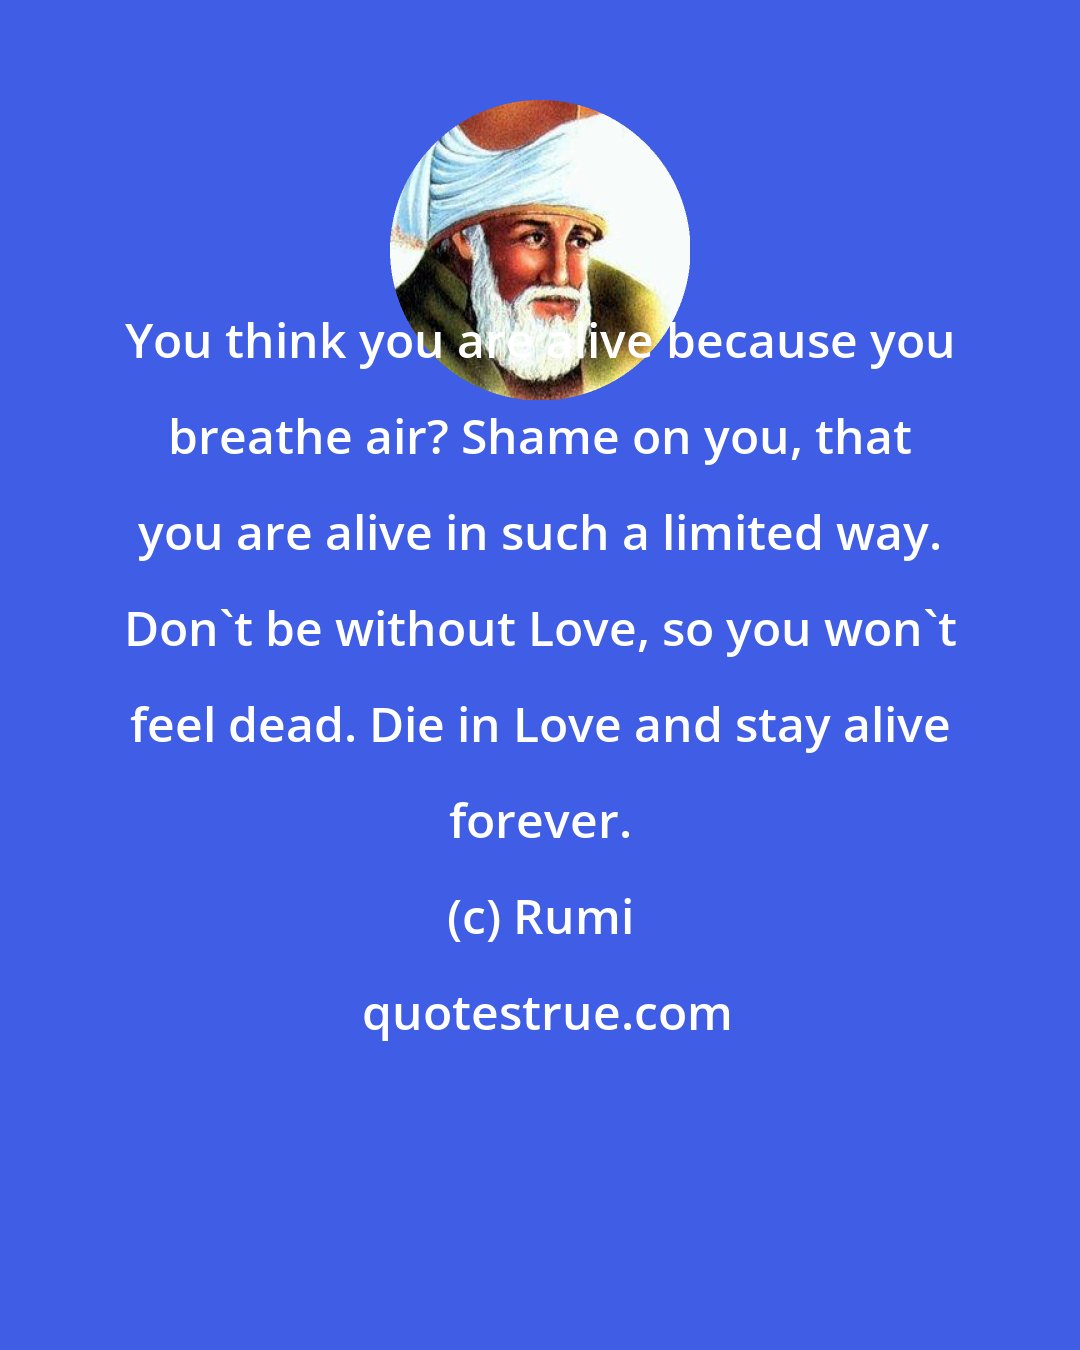 Rumi: You think you are alive because you breathe air? Shame on you, that you are alive in such a limited way. Don't be without Love, so you won't feel dead. Die in Love and stay alive forever.